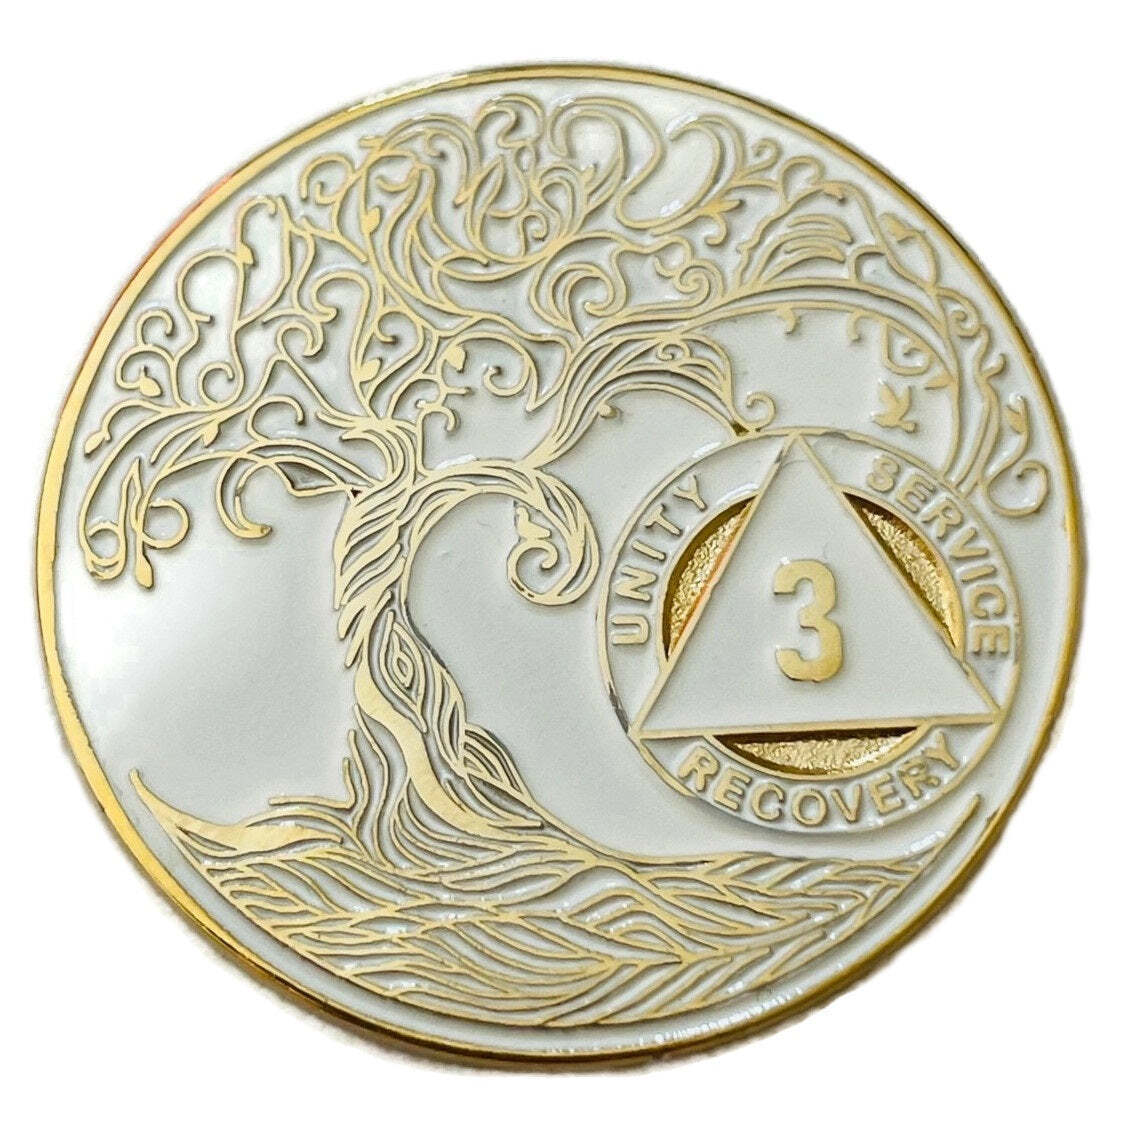 3 Year Sobriety Mint Twisted Tree Of Life Gold Plated Aa Recovery Medallion - Th